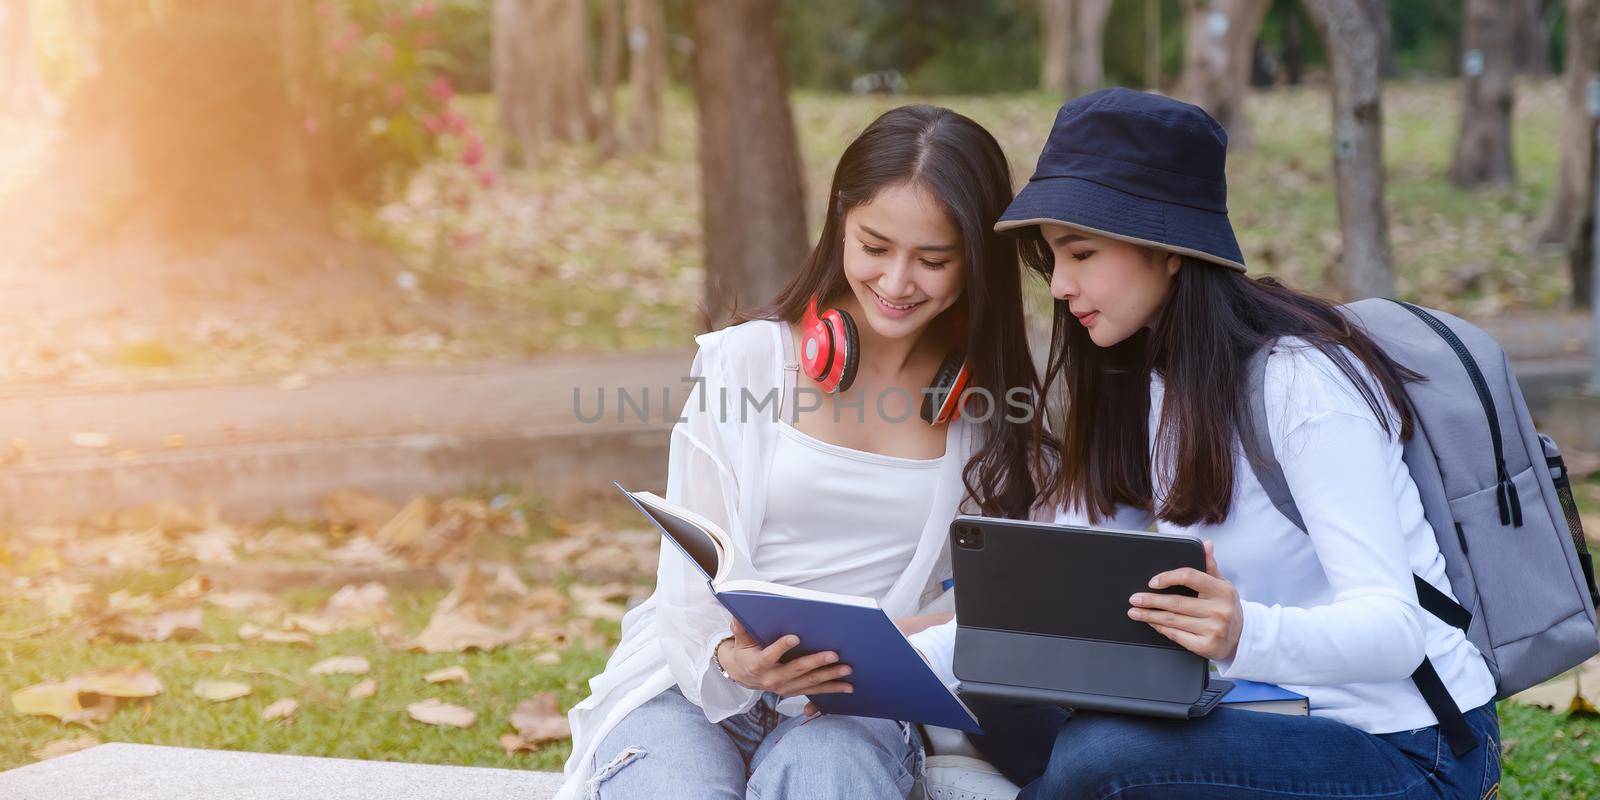 Two students are sitting in park during reading a book and communication. Study, education, university, college, graduate concept